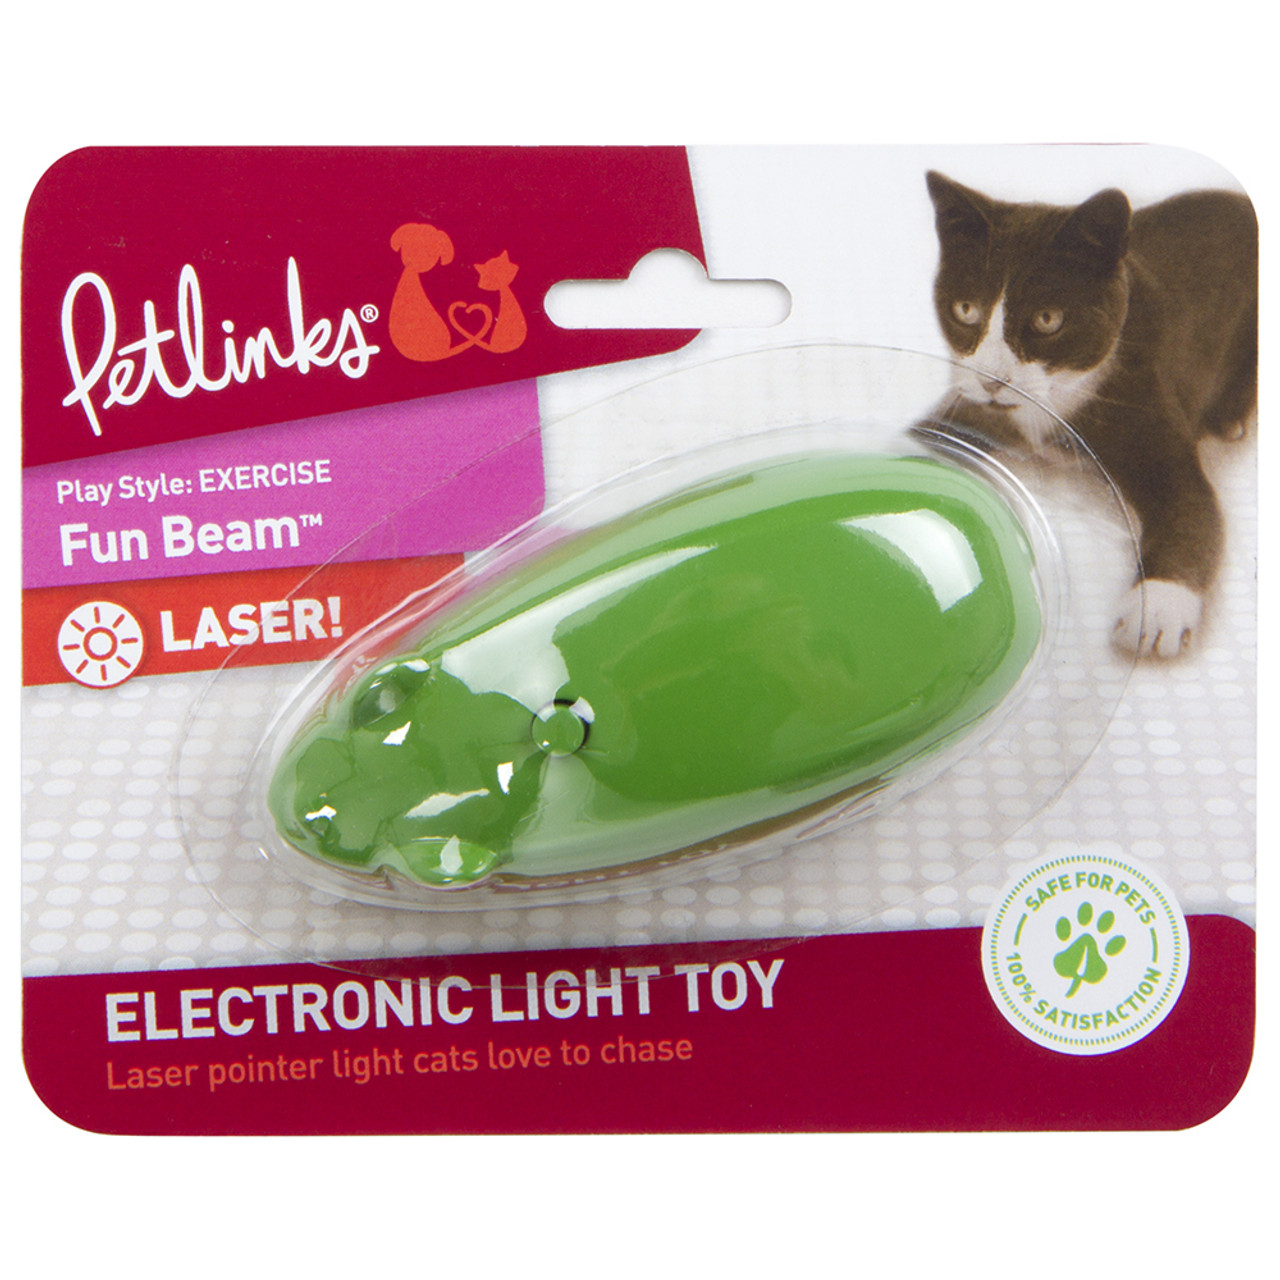 Petlinks Fun Beam Laser Pointer Cat Toy, Assorted - Front, Green